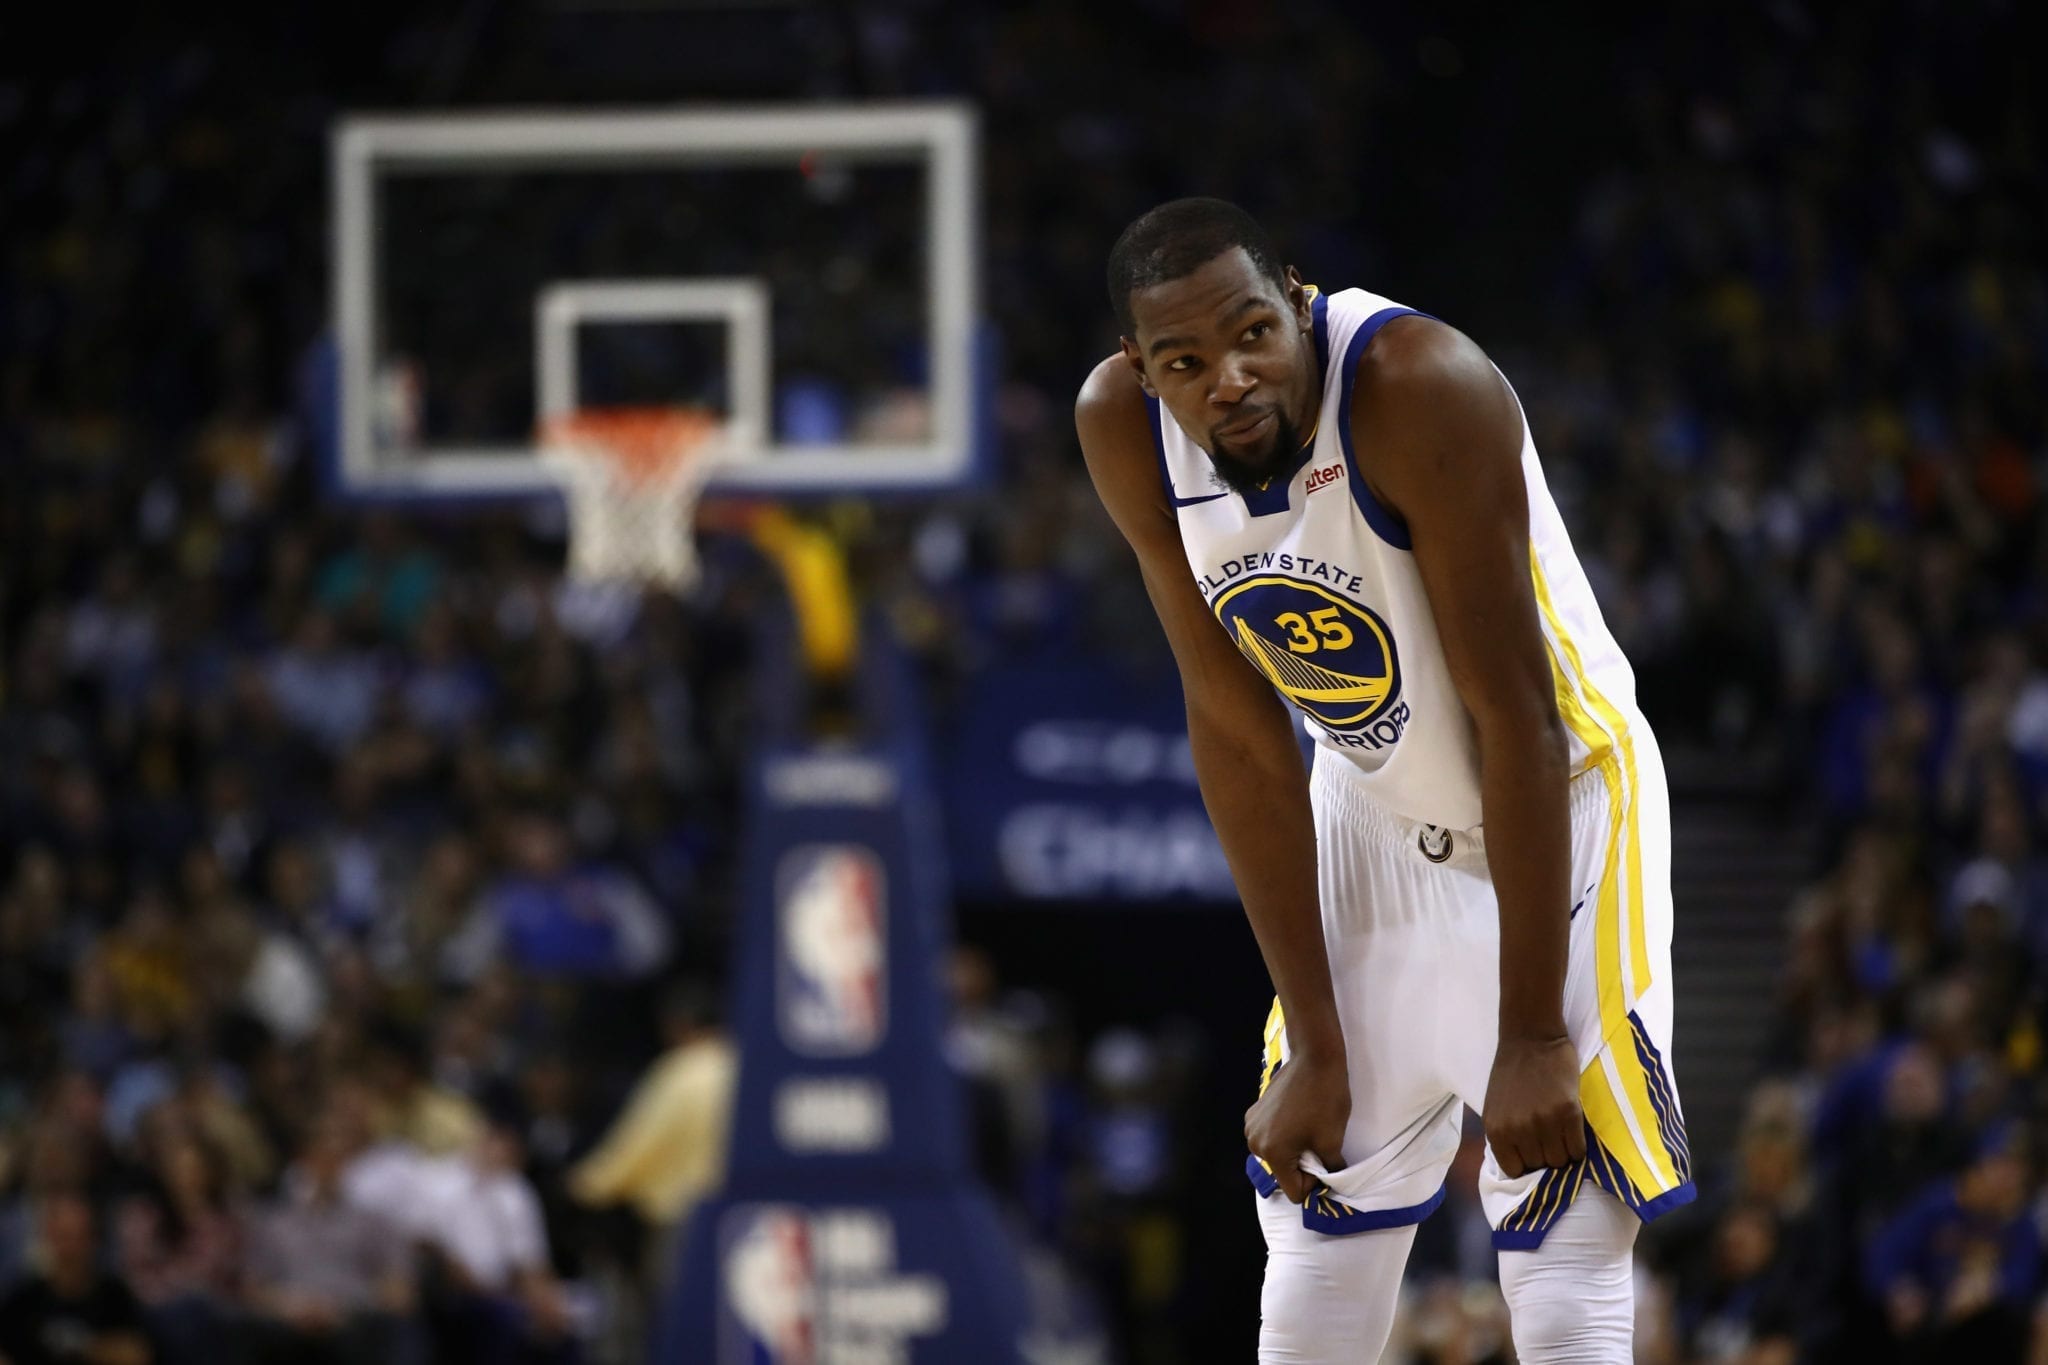 OAKLAND, CA - OCTOBER 16: Kevin Durant #35 of the Golden State Warriors smiles back towards the bench of the Oklahoma City Thunder at ORACLE Arena on October 16, 2018 in Oakland, California. NOTE TO USER: User expressly acknowledges and agrees that, by downloading and or using this photograph, User is consenting to the terms and conditions of the Getty Images License Agreement. (Photo by Ezra Shaw/Getty Images)